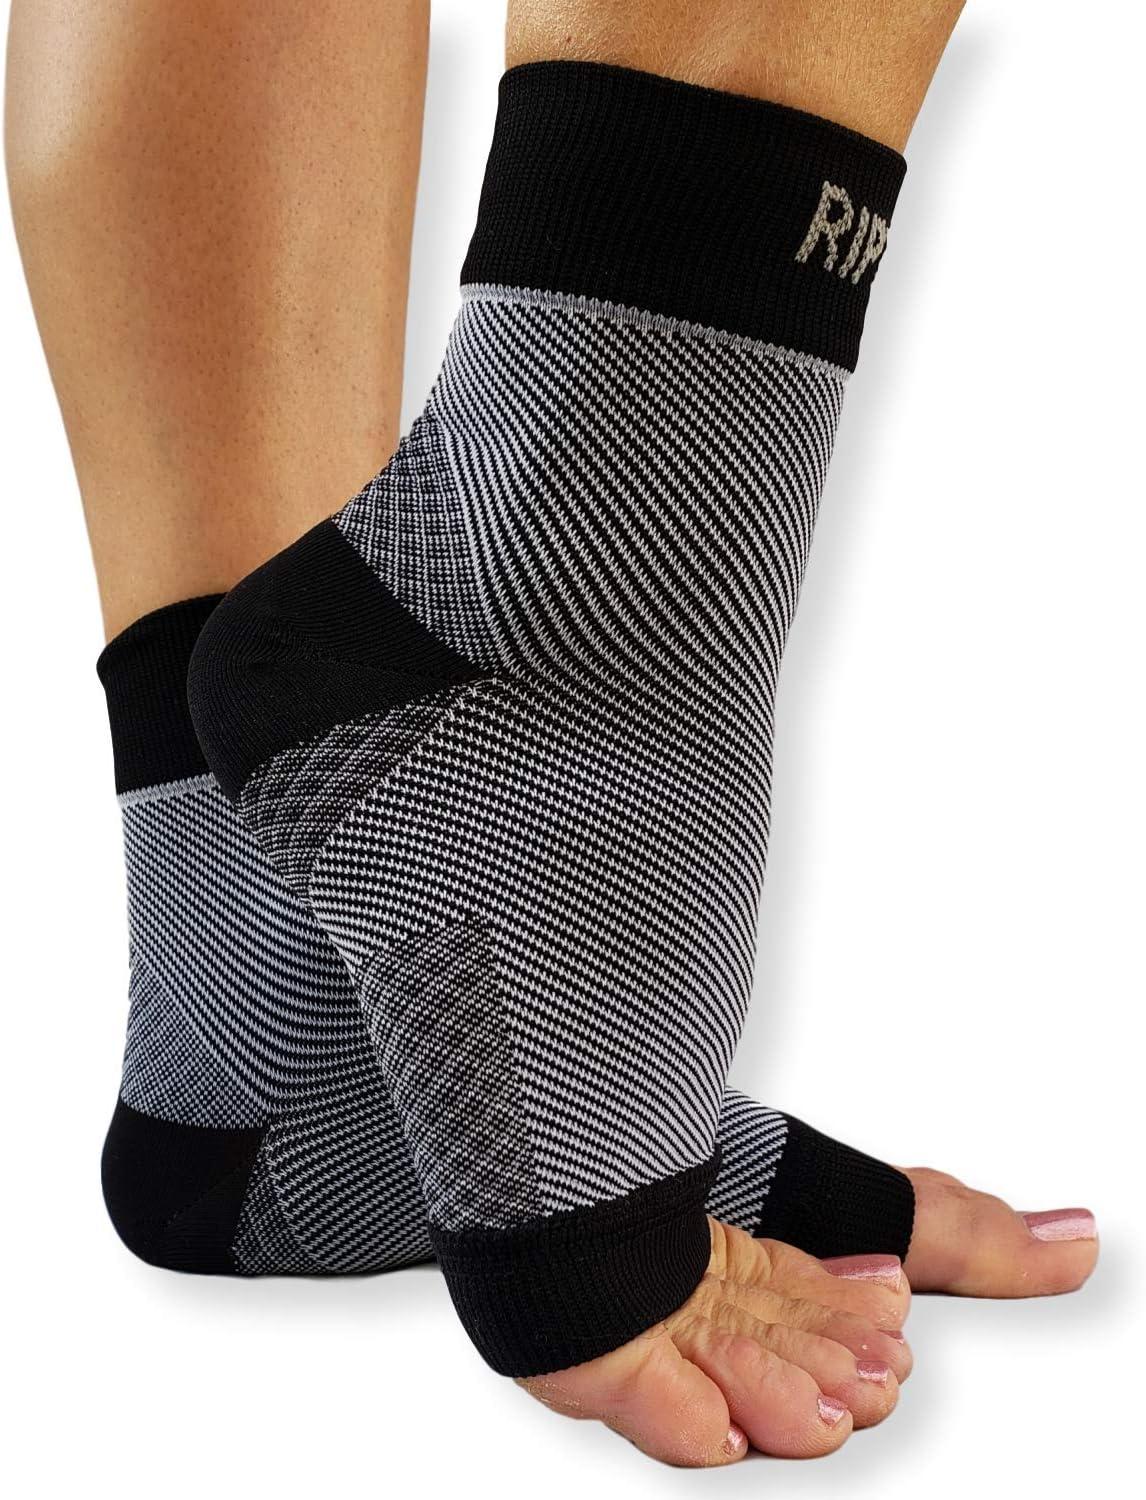 RiptGear Plantar Fasciitis Socks for Women and Men - Ankle Brace with Arch  Support - Ankle Compression Sleeve to Reduce Swelling for Foot Pain Relief  - (Large) (Black) Large (1 Pair)